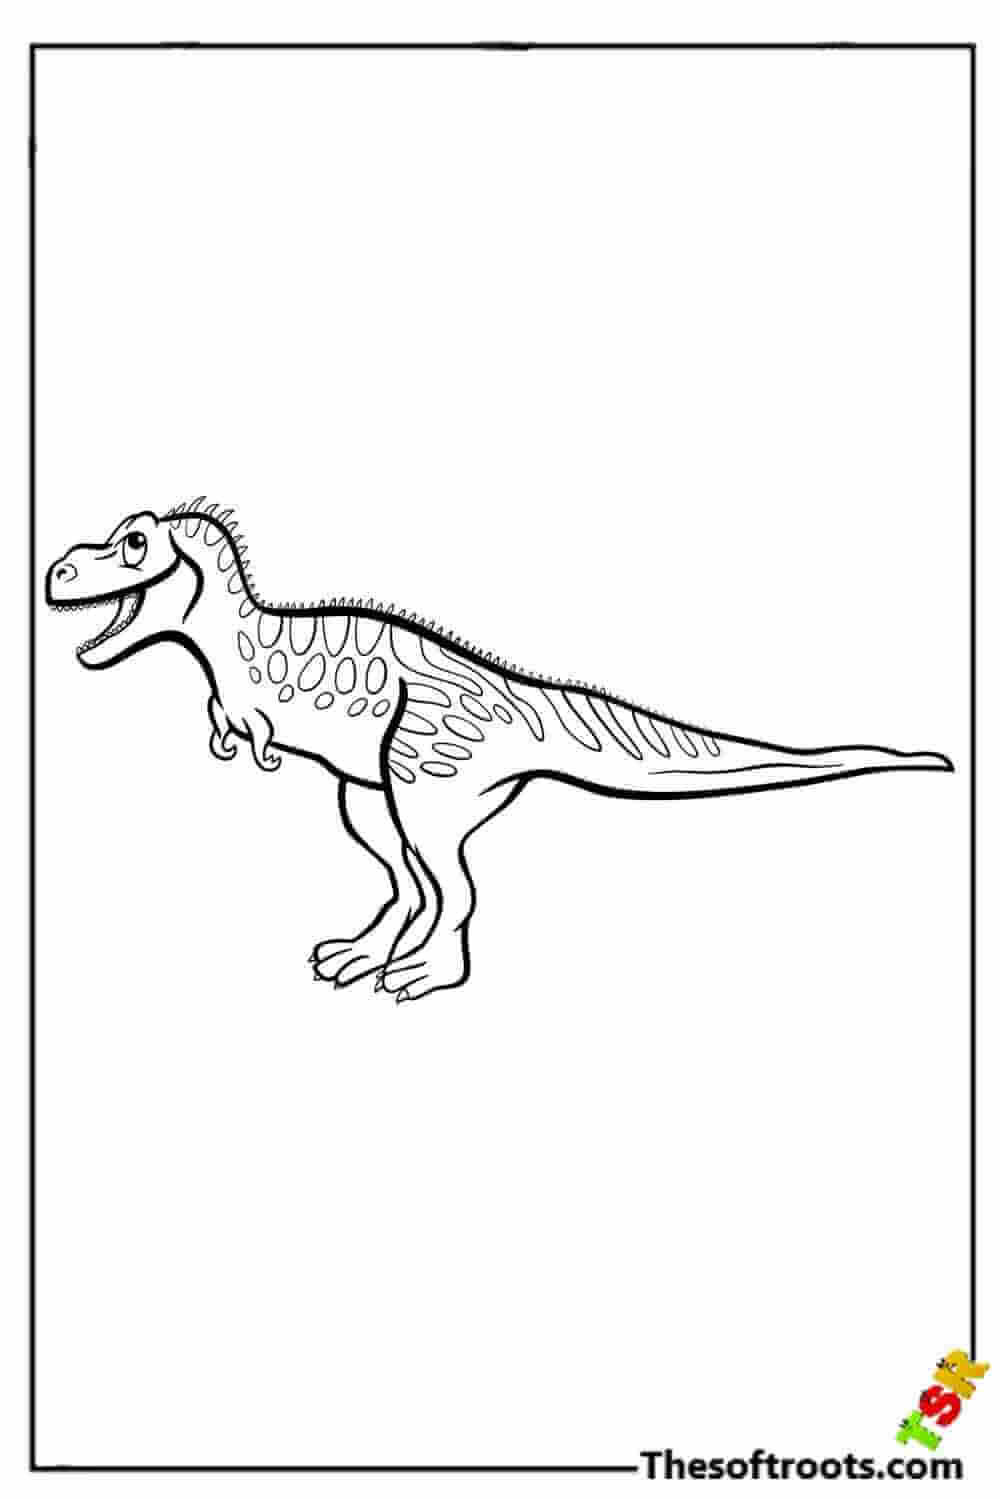 Tarbosaurus coloring pages